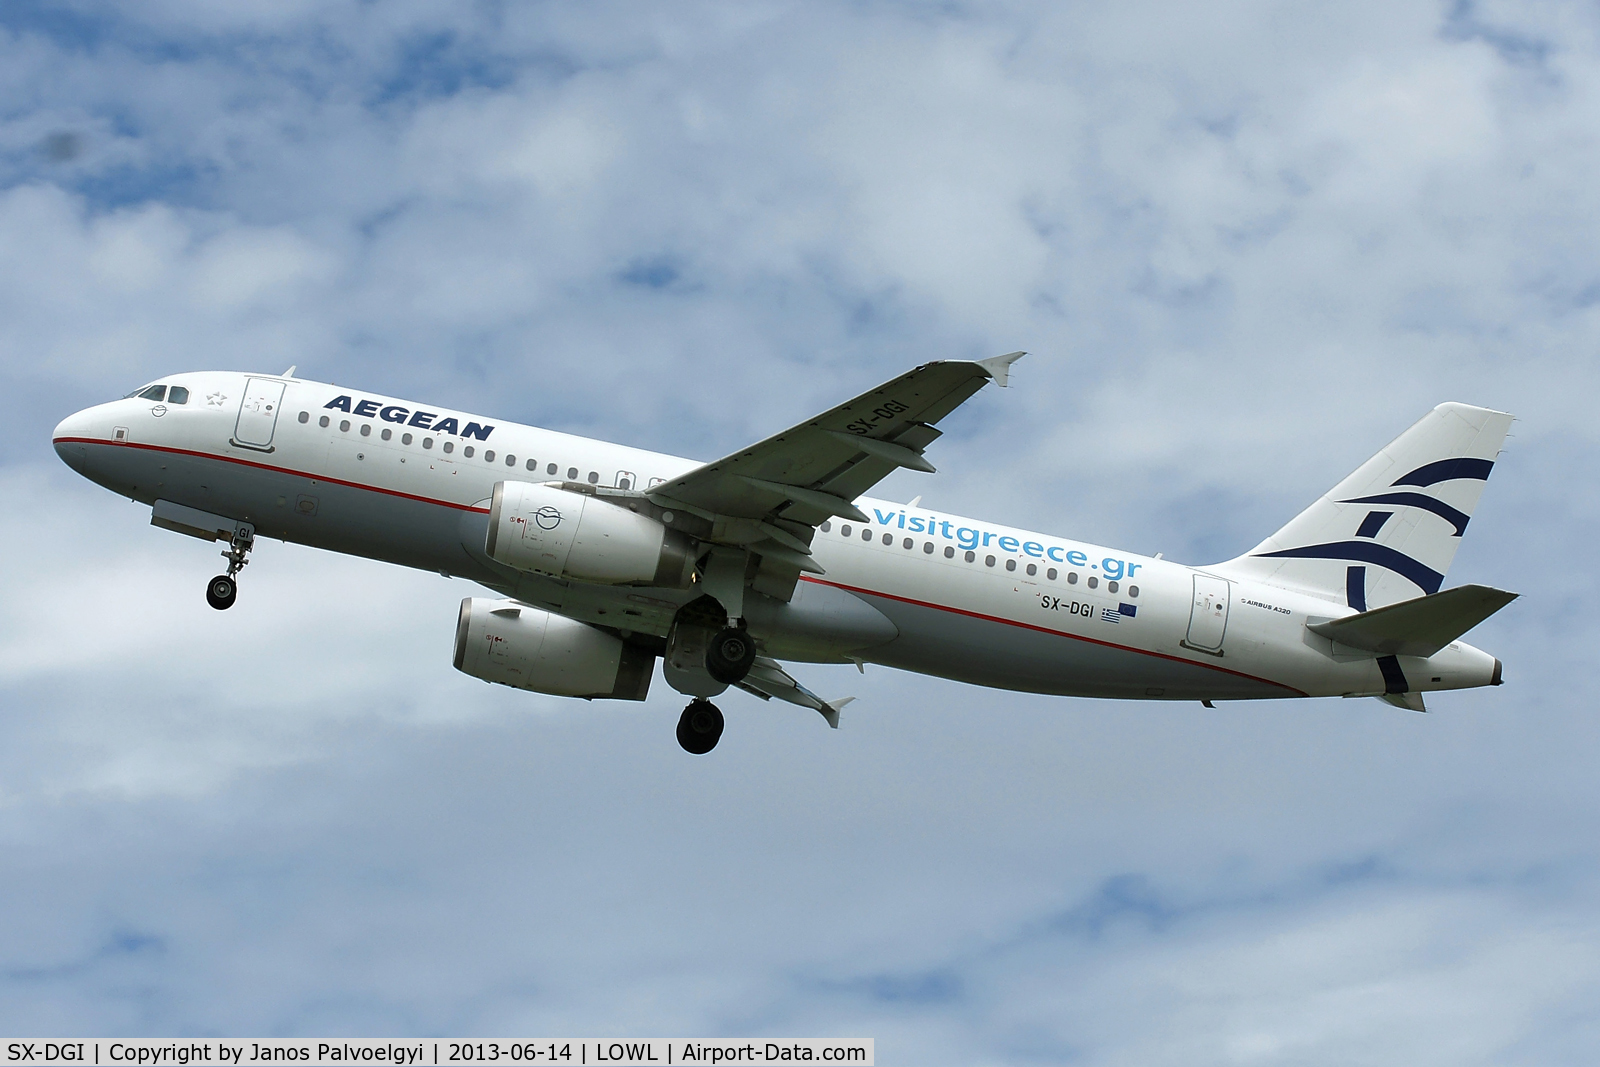 SX-DGI, 2007 Airbus A320-232 C/N 3162, Aegean Airlines Airbus A320-232 with sticker 